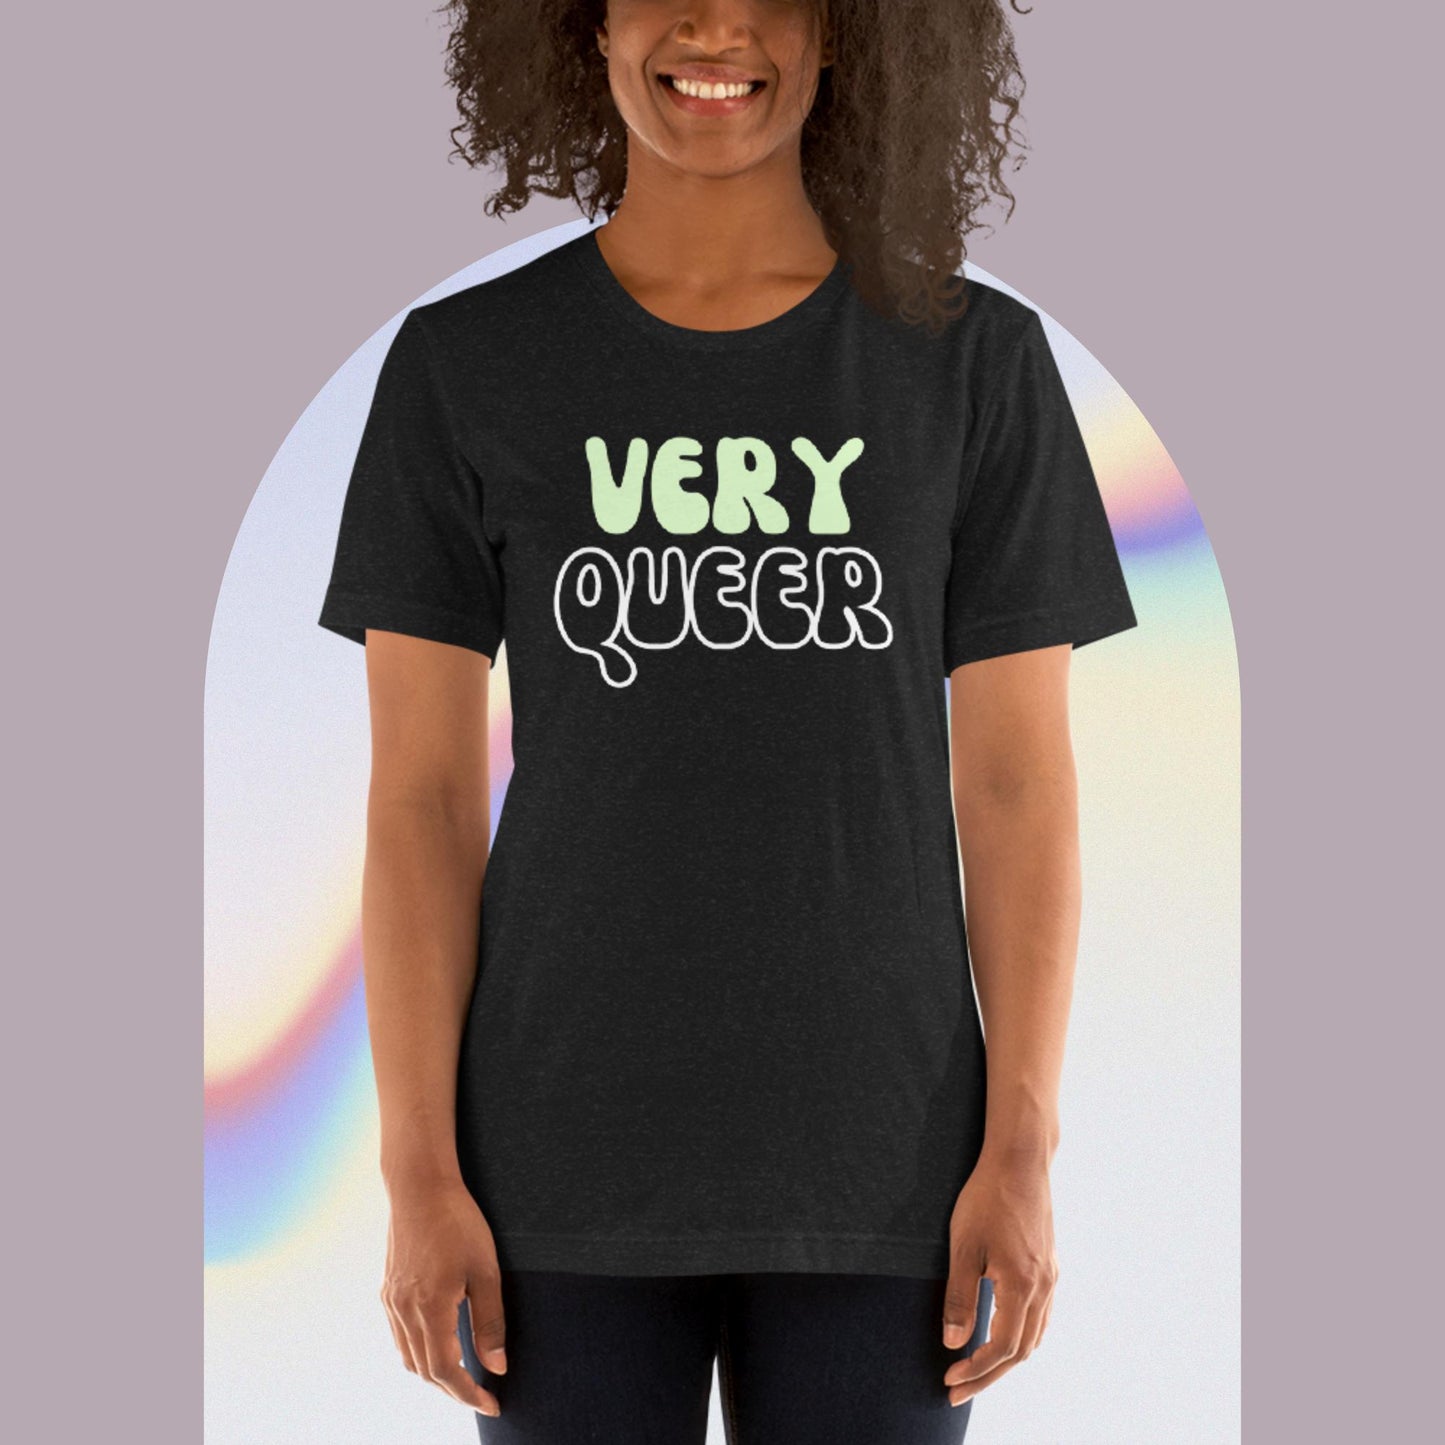 VERY QUEER - T-Shirt